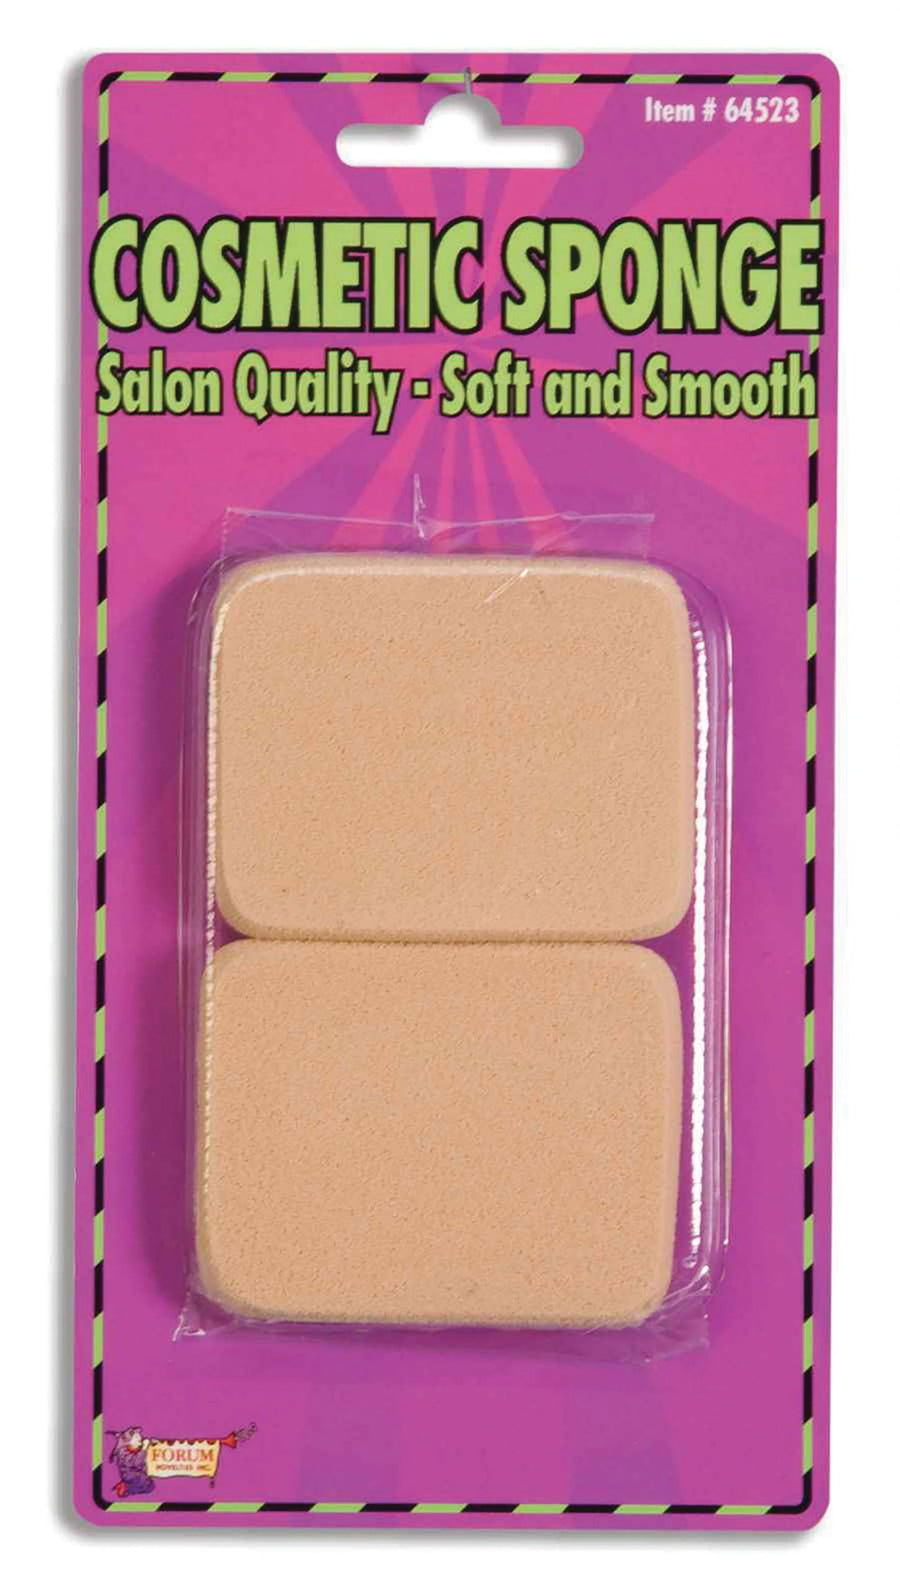 Cosmetic Sponges 2 In A Pkt Pink Make Up Unisex_1 MU076